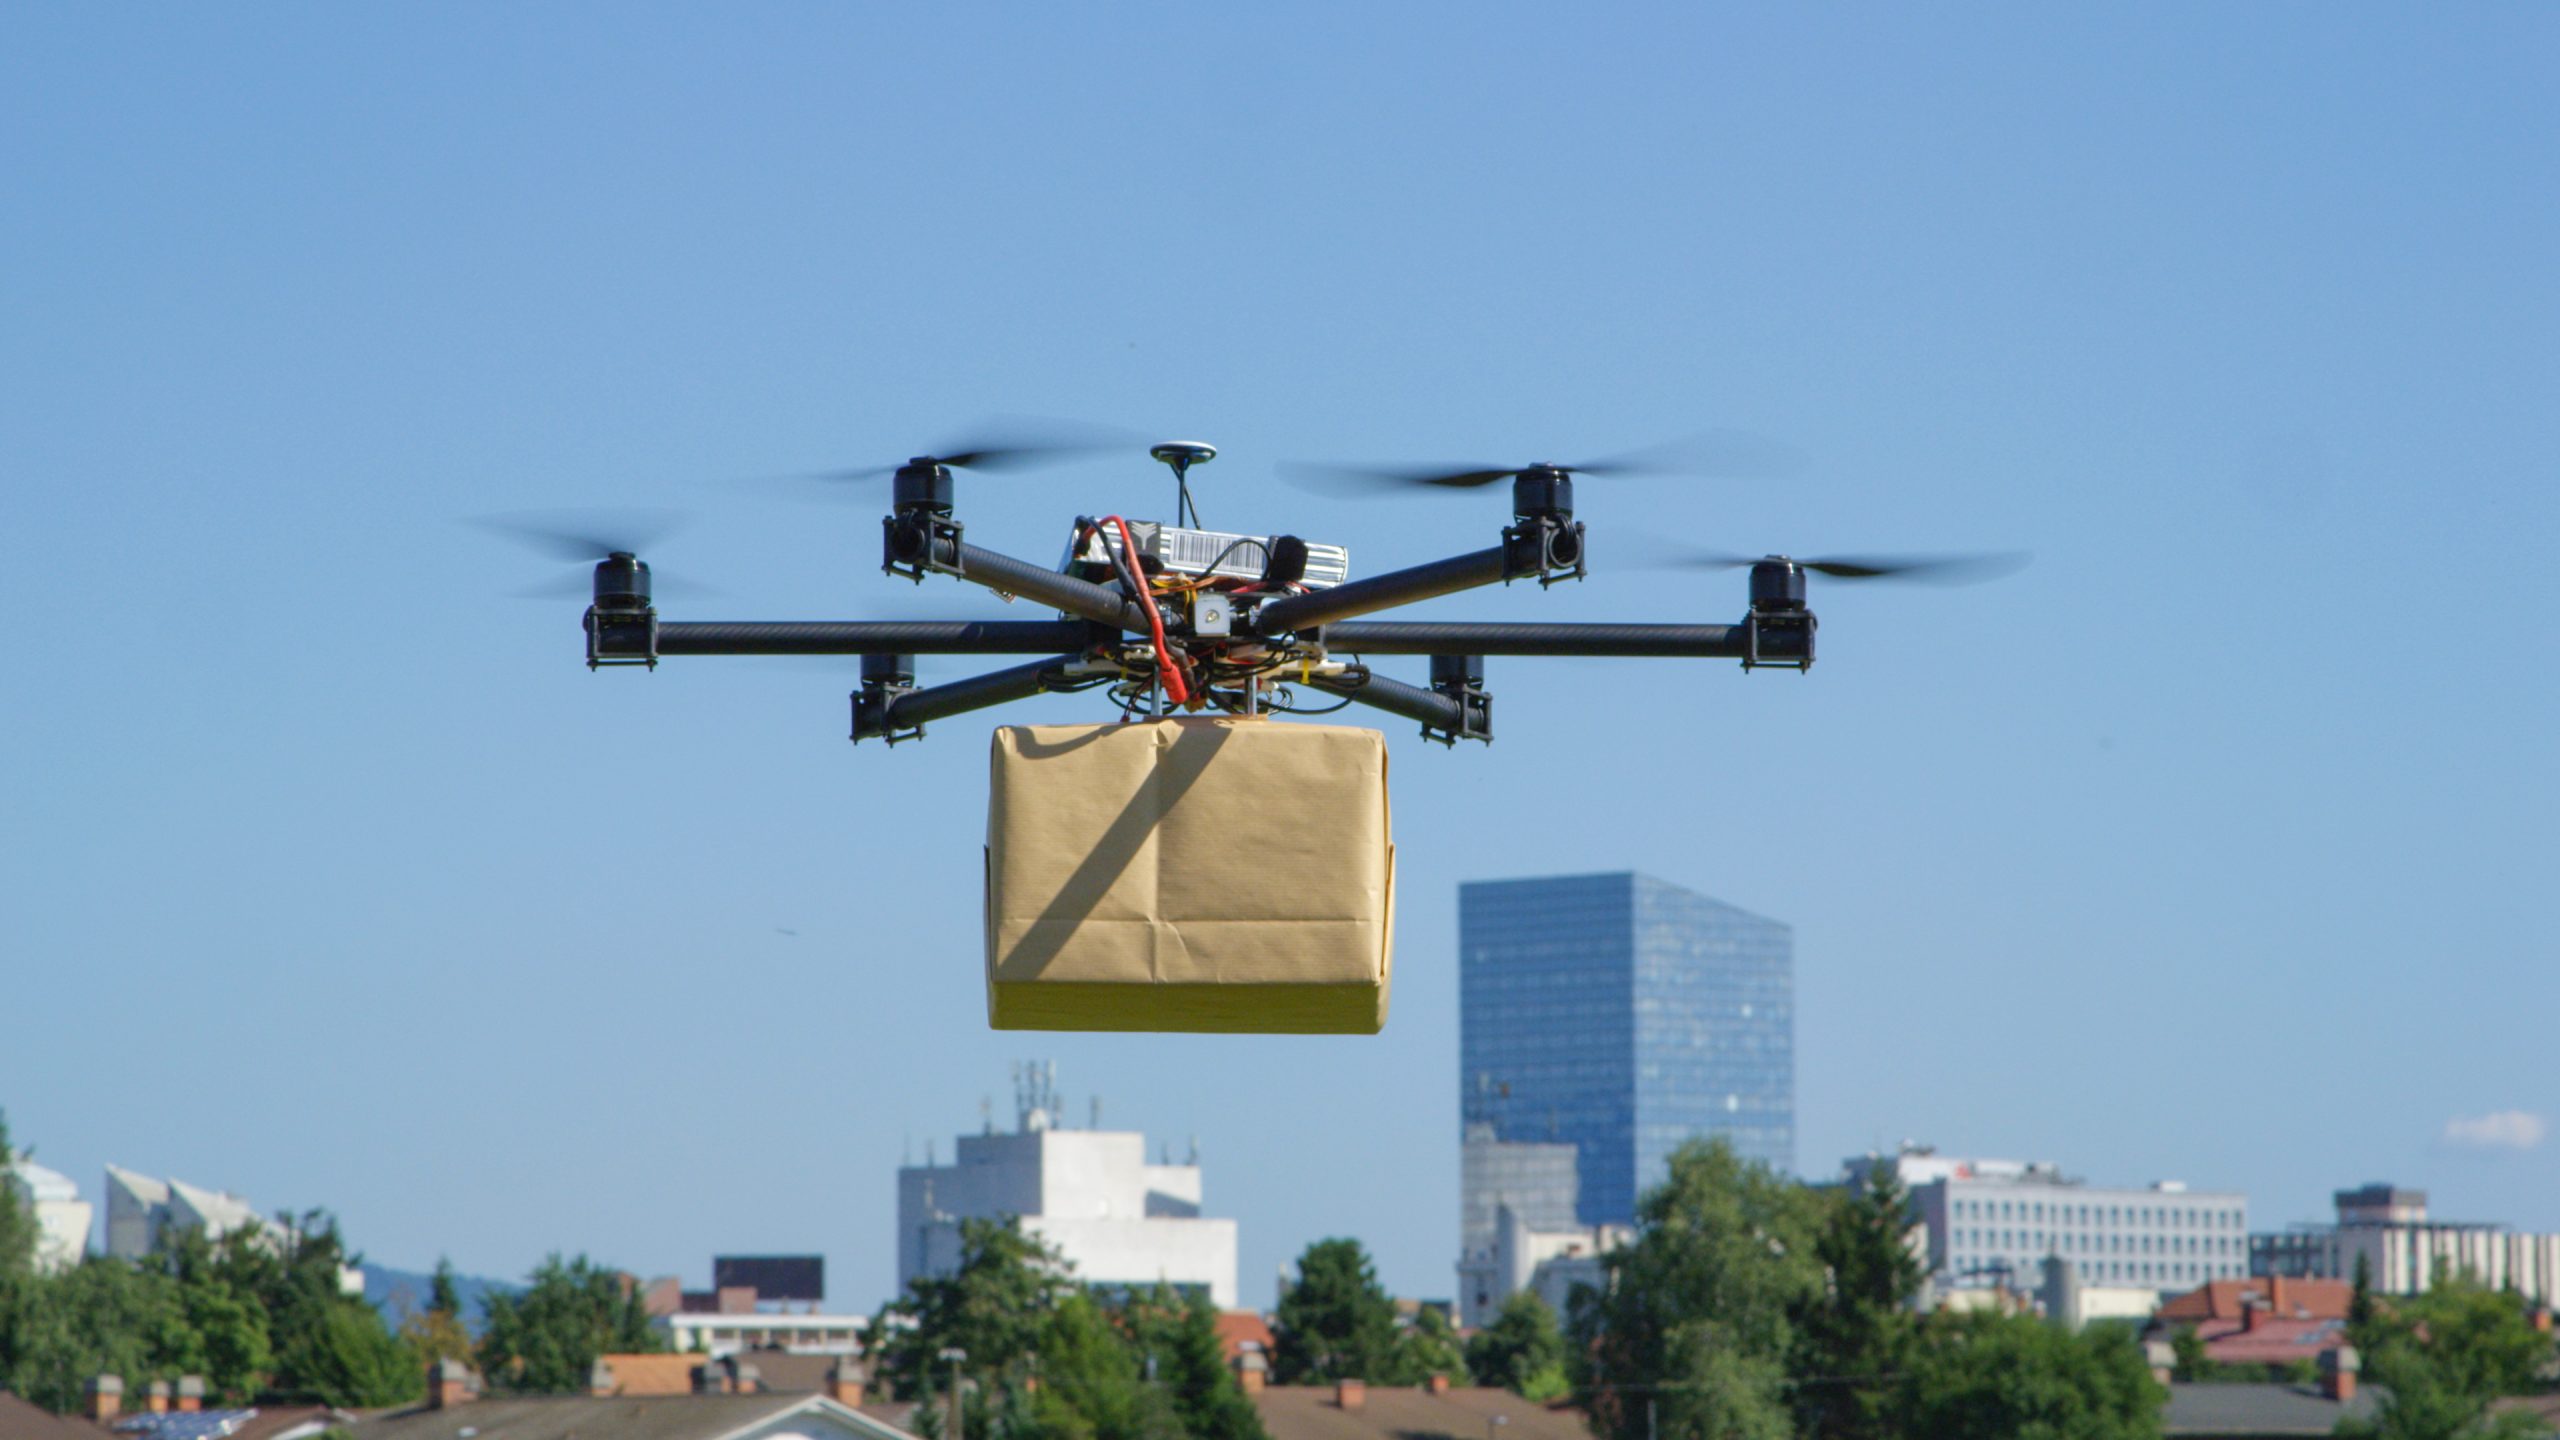 Zipline Drone Delivery Ready for Launch in US Cities